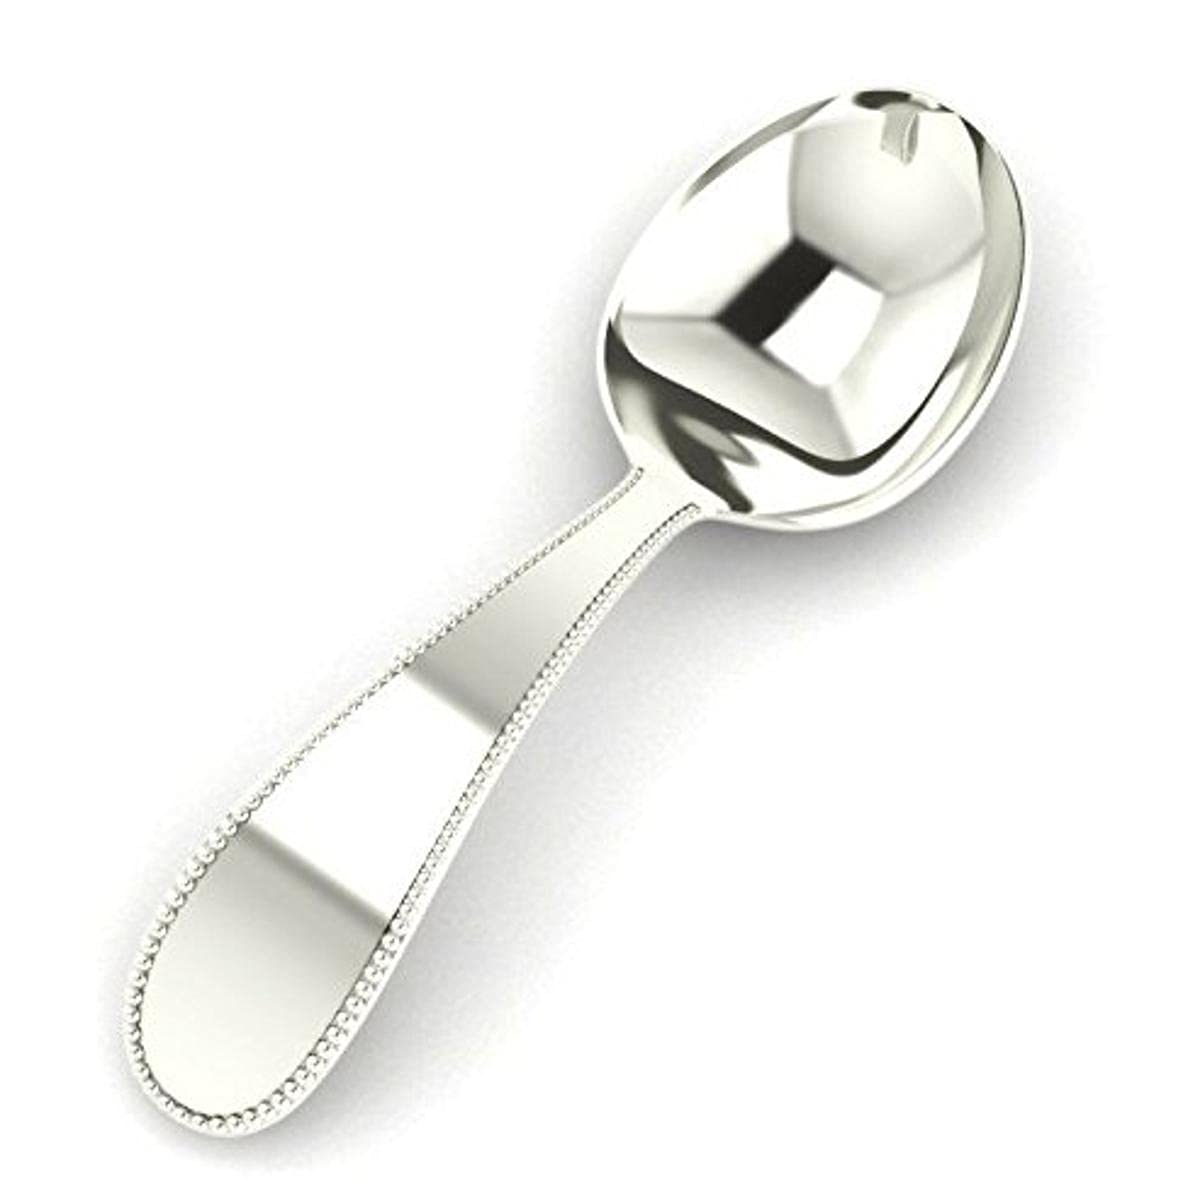 Krysaliis Sterling Silver Beaded Feeding Baby Spoon - Premium Quality Food Grade Standard .925 Solid Sterling Silver Spoon - Engravable Gift For Baby with a Beautiful Gift Box